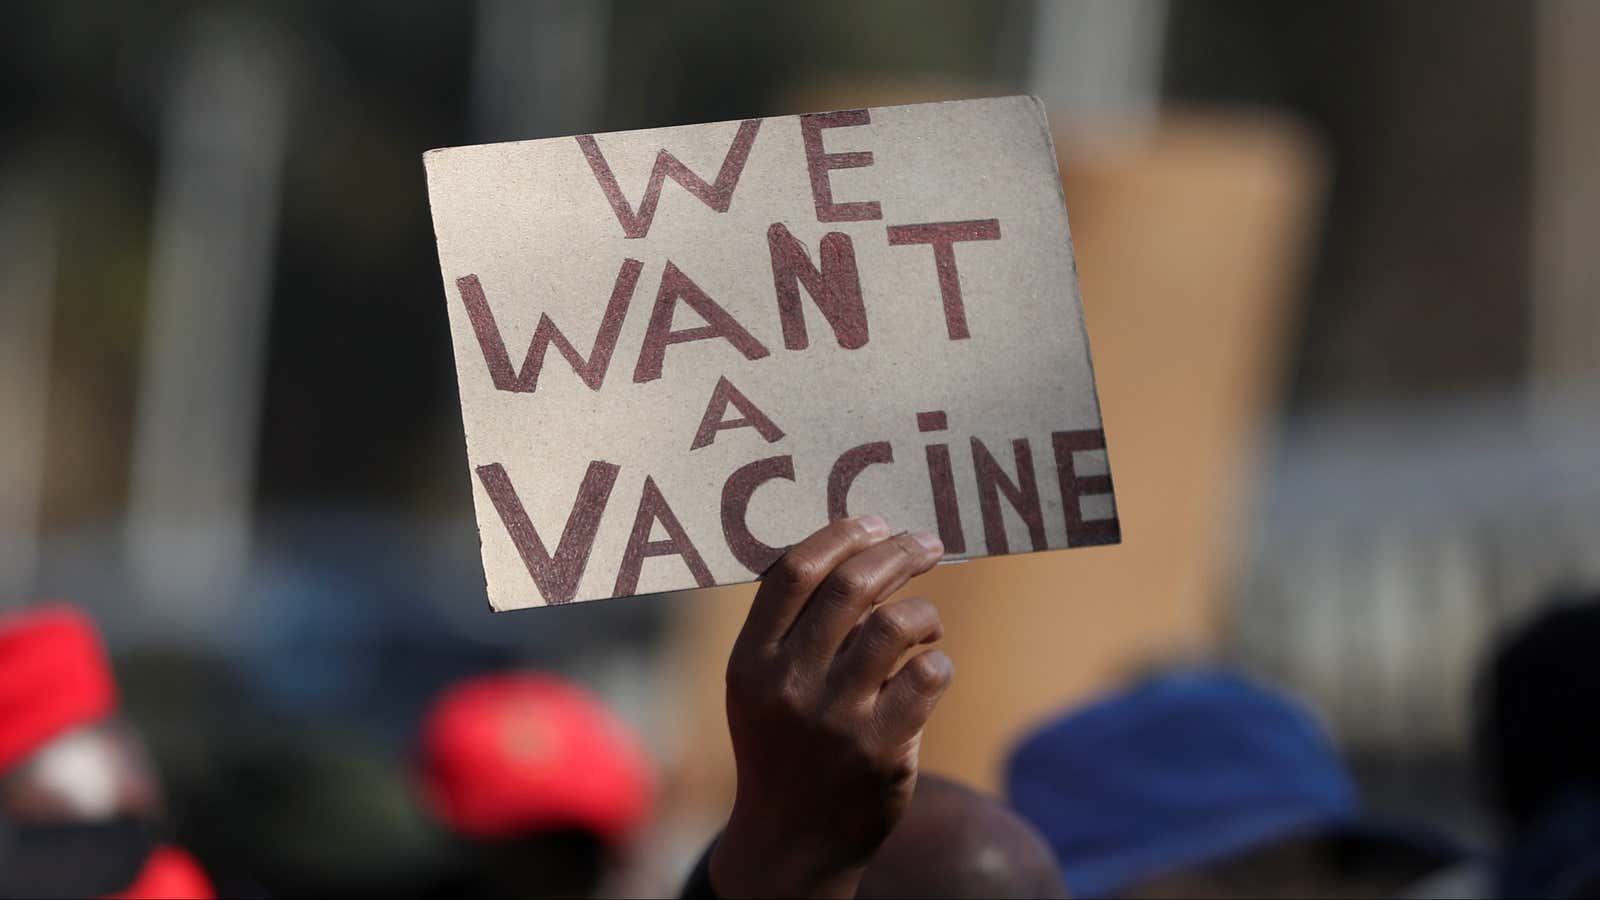 “We cannot accept countries that have already used most of the global supply of vaccines using even more of it, while the world’s most vulnerable people remain unprotected,” Dr. Tedros said.